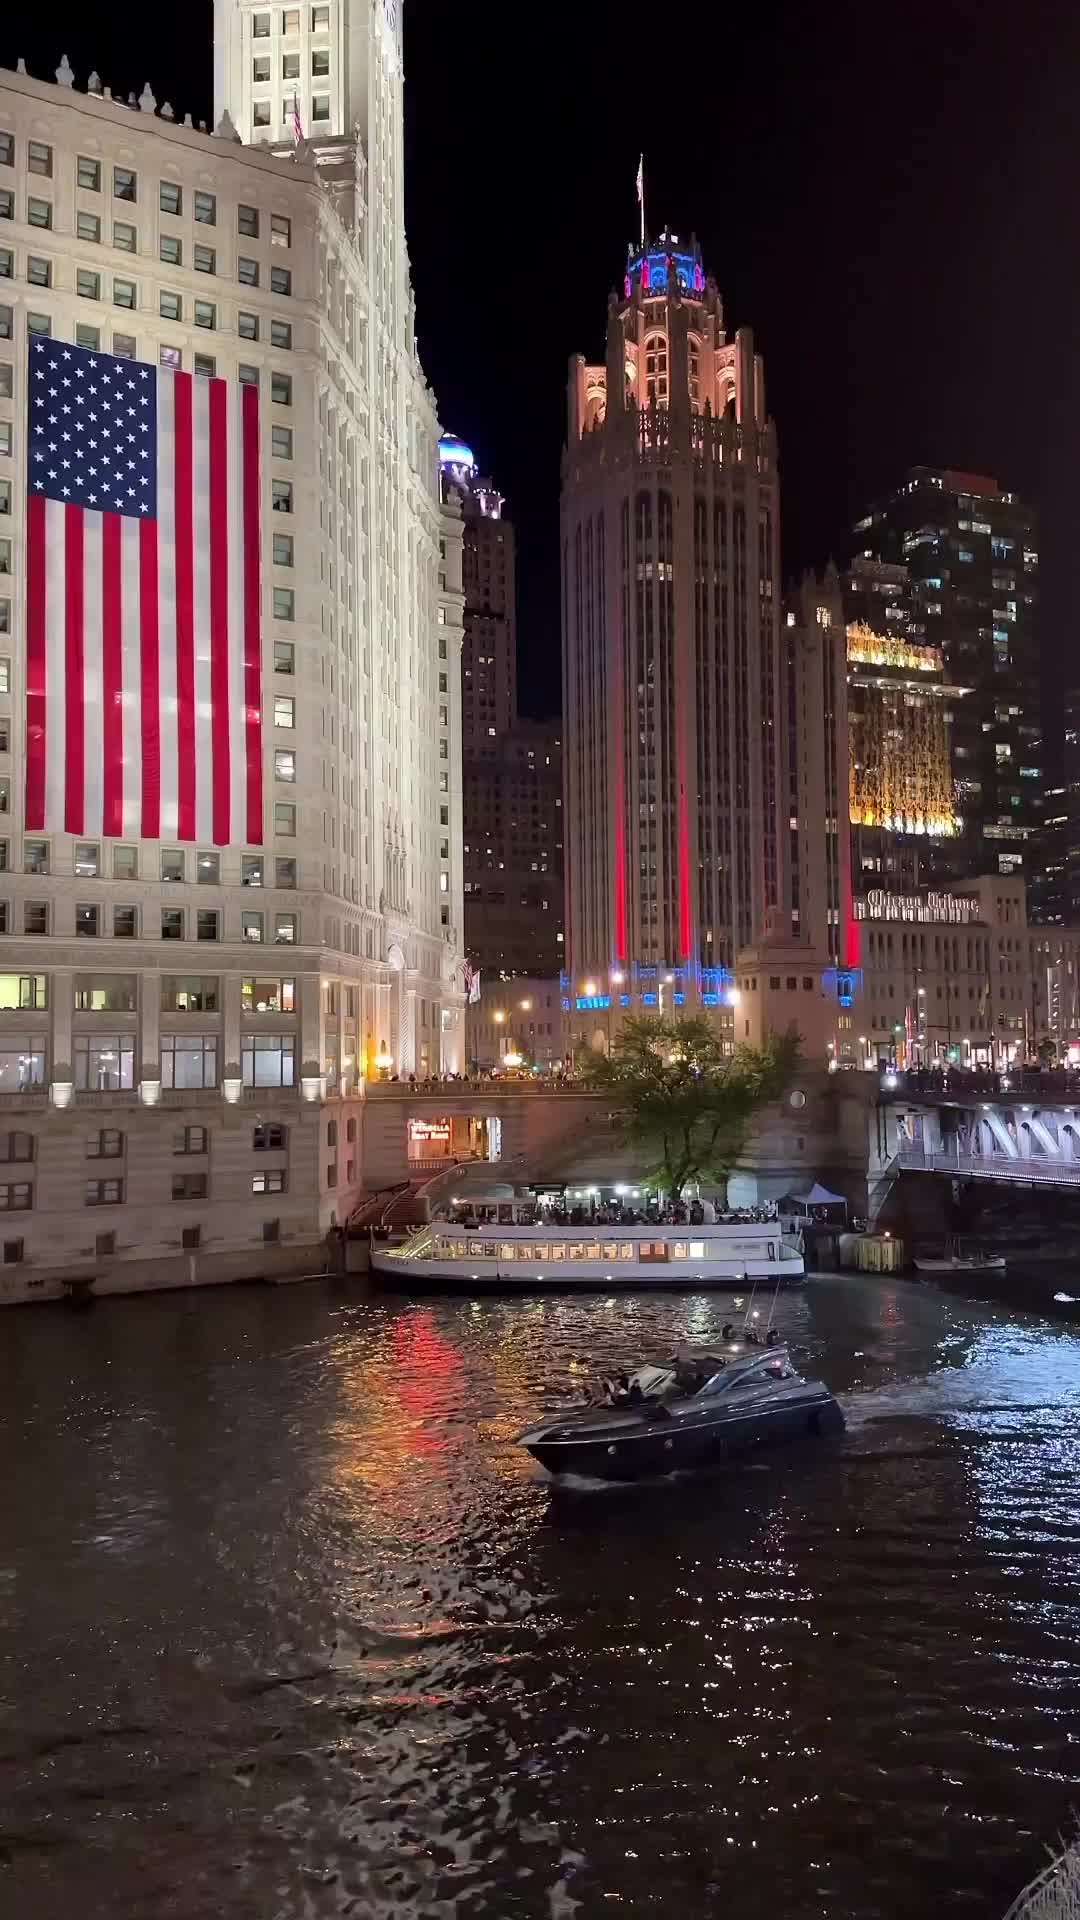 ‘Cause you’re a sky, you’re a sky full of stars ❤️🇺🇸

Chicago Riverwalk, 4th of July ❤️🤍💙

📍The Wrigley Building, Michigan Ave on a beautiful summer night 🌃🇺🇸

➡️ @tatiana.pesotskaya
.
.
.
.
#reelsinstagram #reels #chicago #downtown  #chicagodowntown